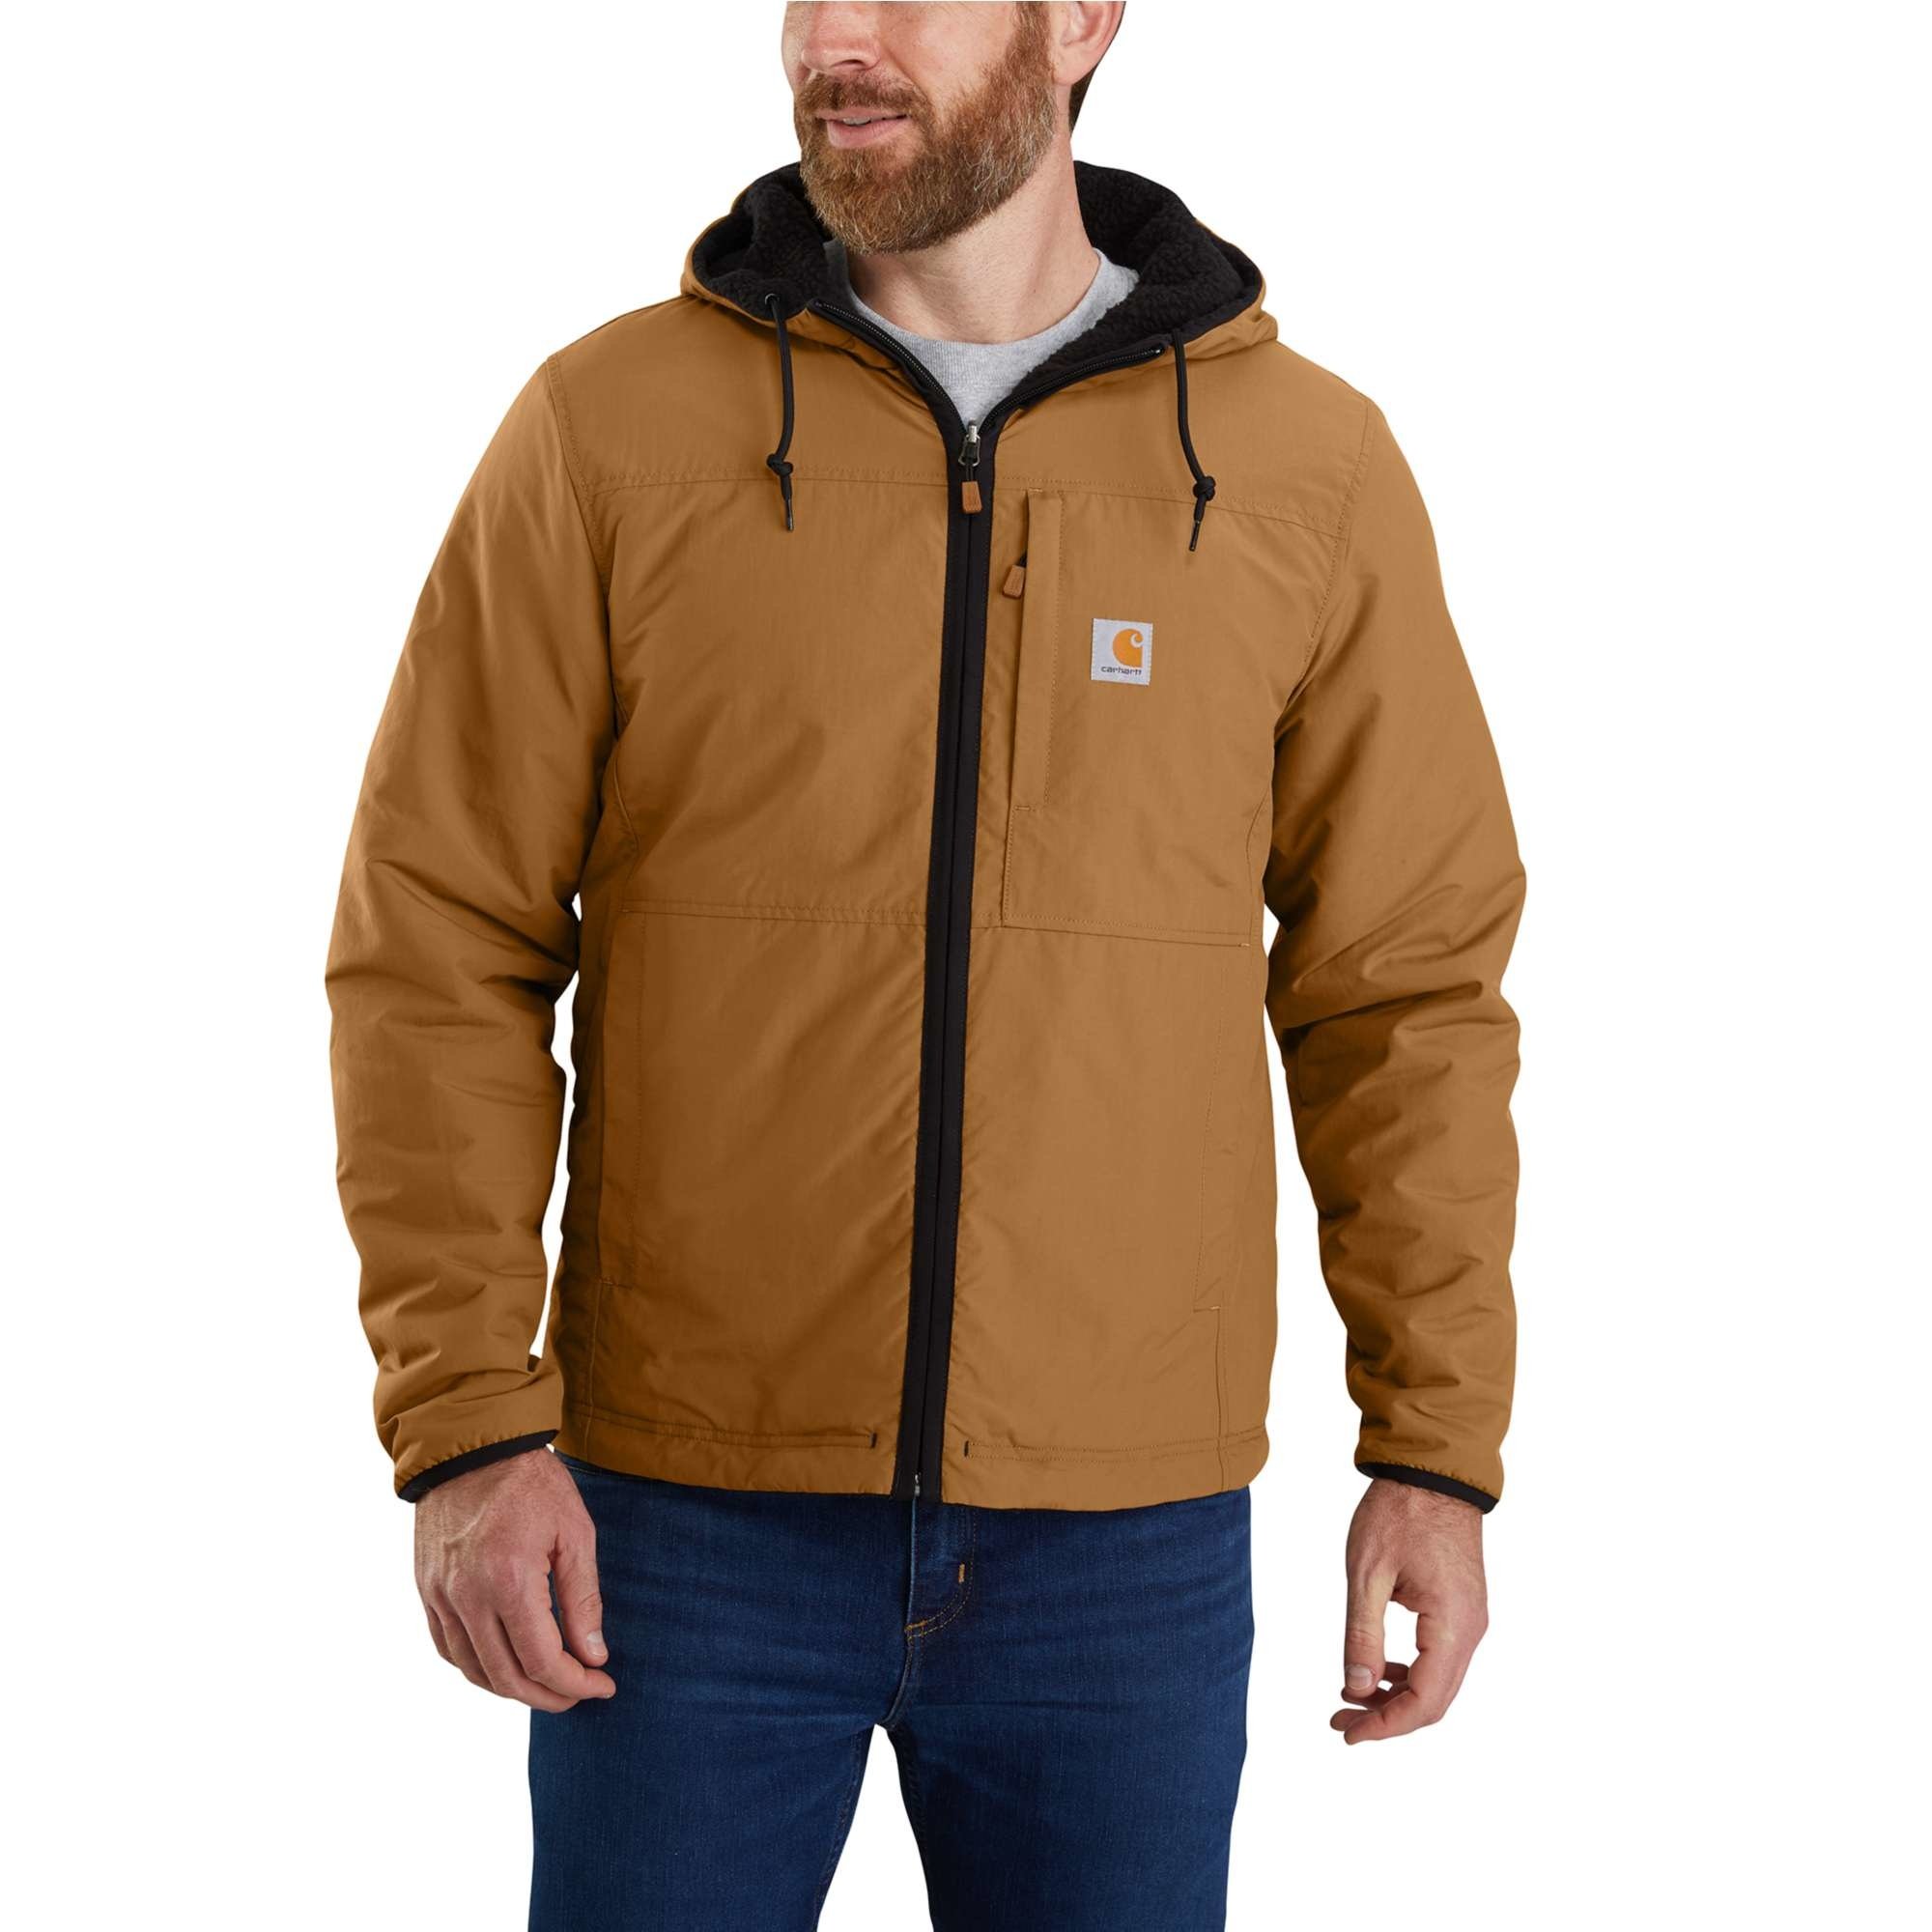 Free Country Men's Reversible Midweight Jacket